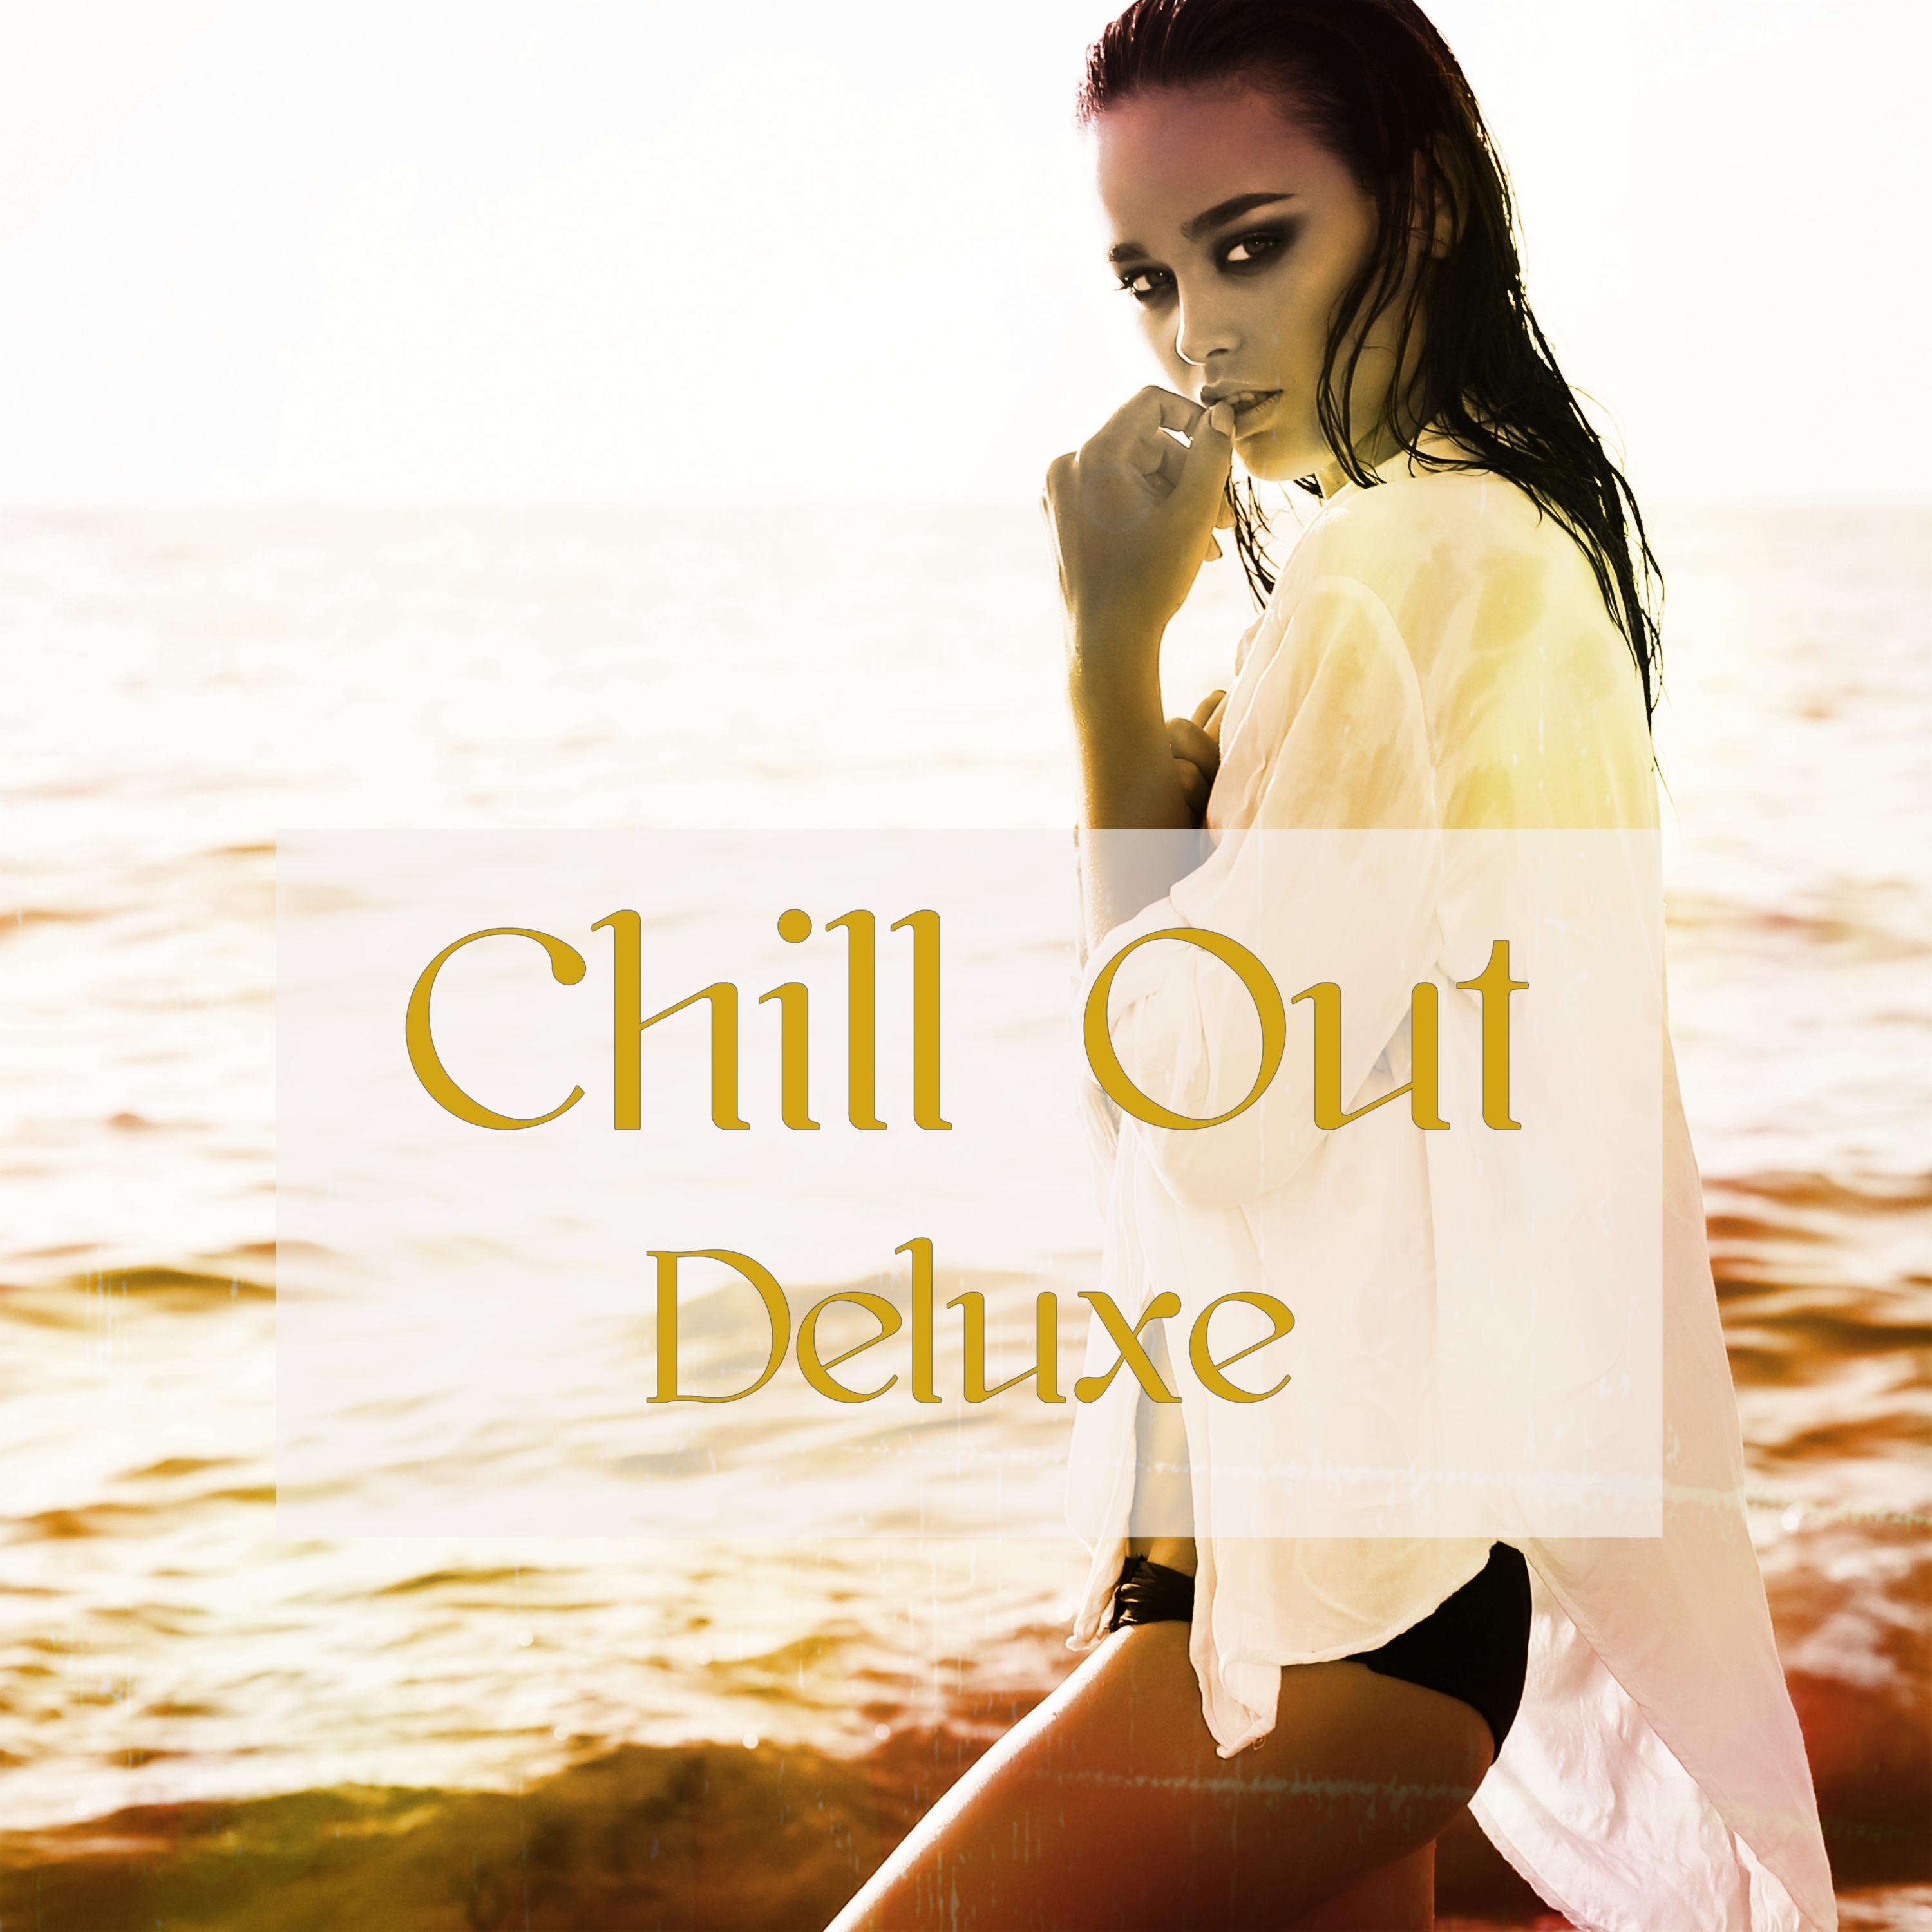 Chill Out Deluxe  Chill Music Cool Instrumental Songs